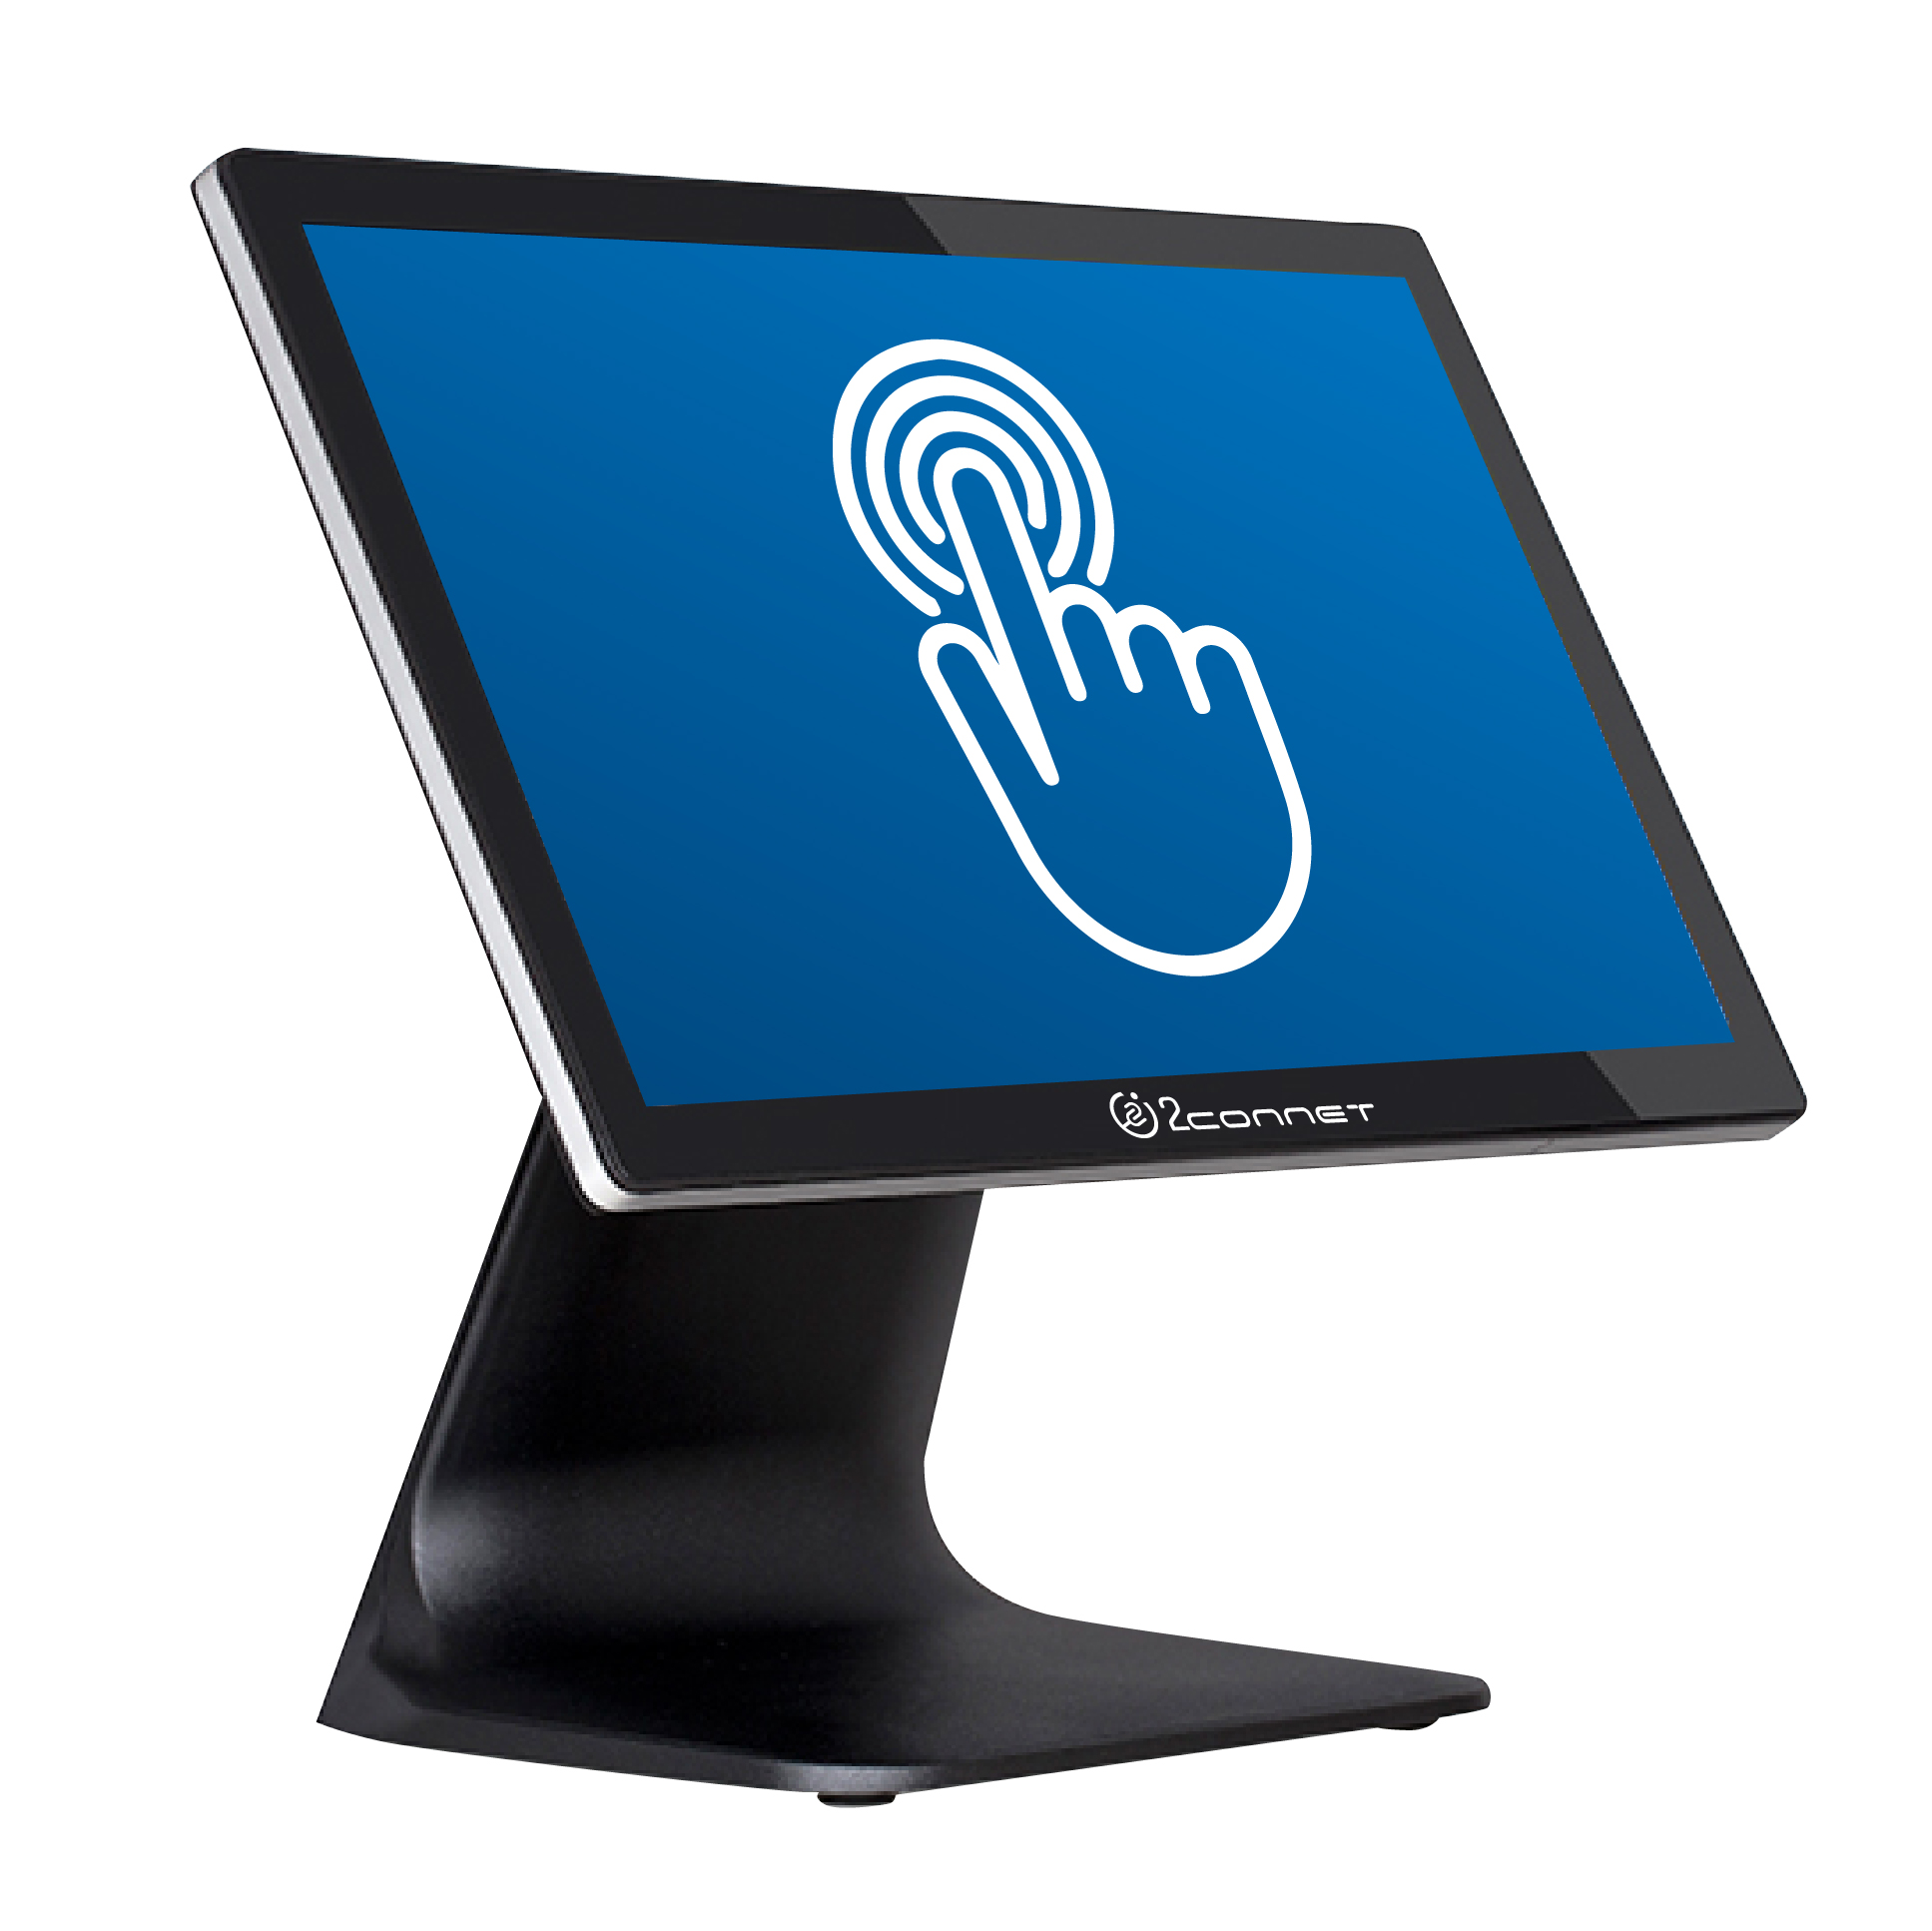 2connet Pos 2c-tm015 15.0p Monitor Touch Capacitive